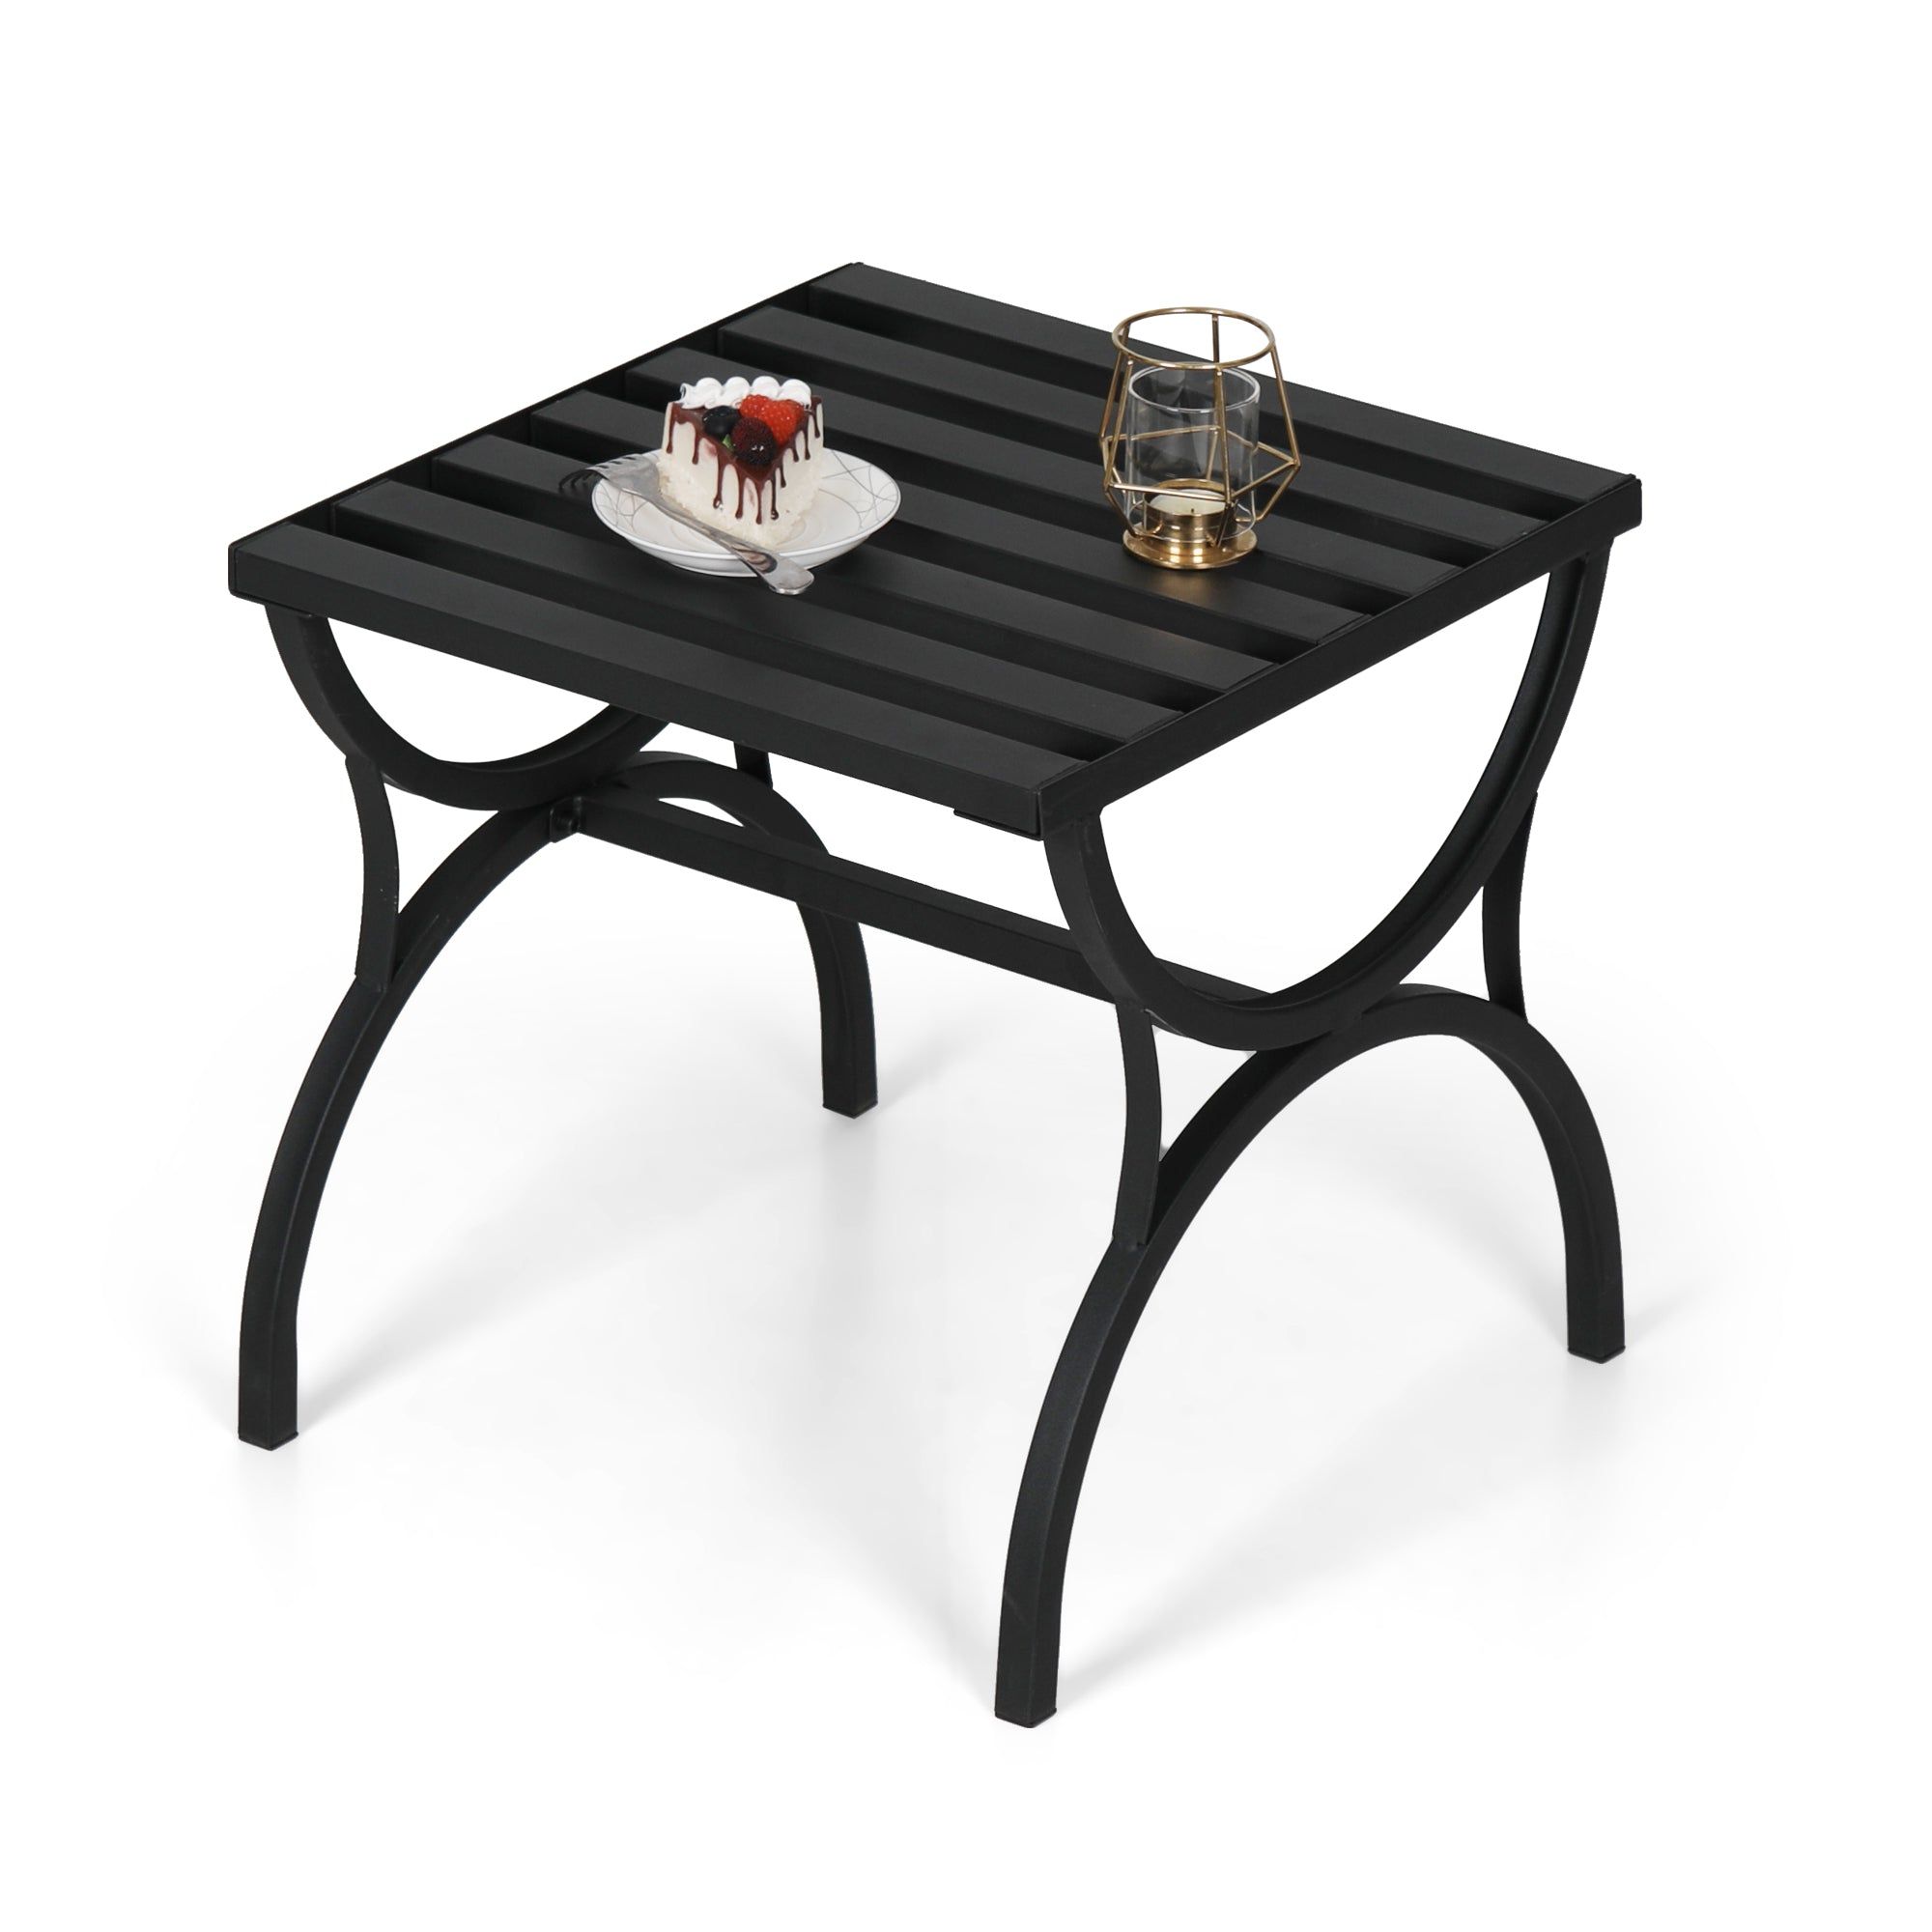 Slat Outdoor Tables With 2019 Mf Studio Patio Side Square End Table Small Portable Bistro Coffee Table  With Metal Frame And Slat Top, Black – Walmart (View 15 of 15)